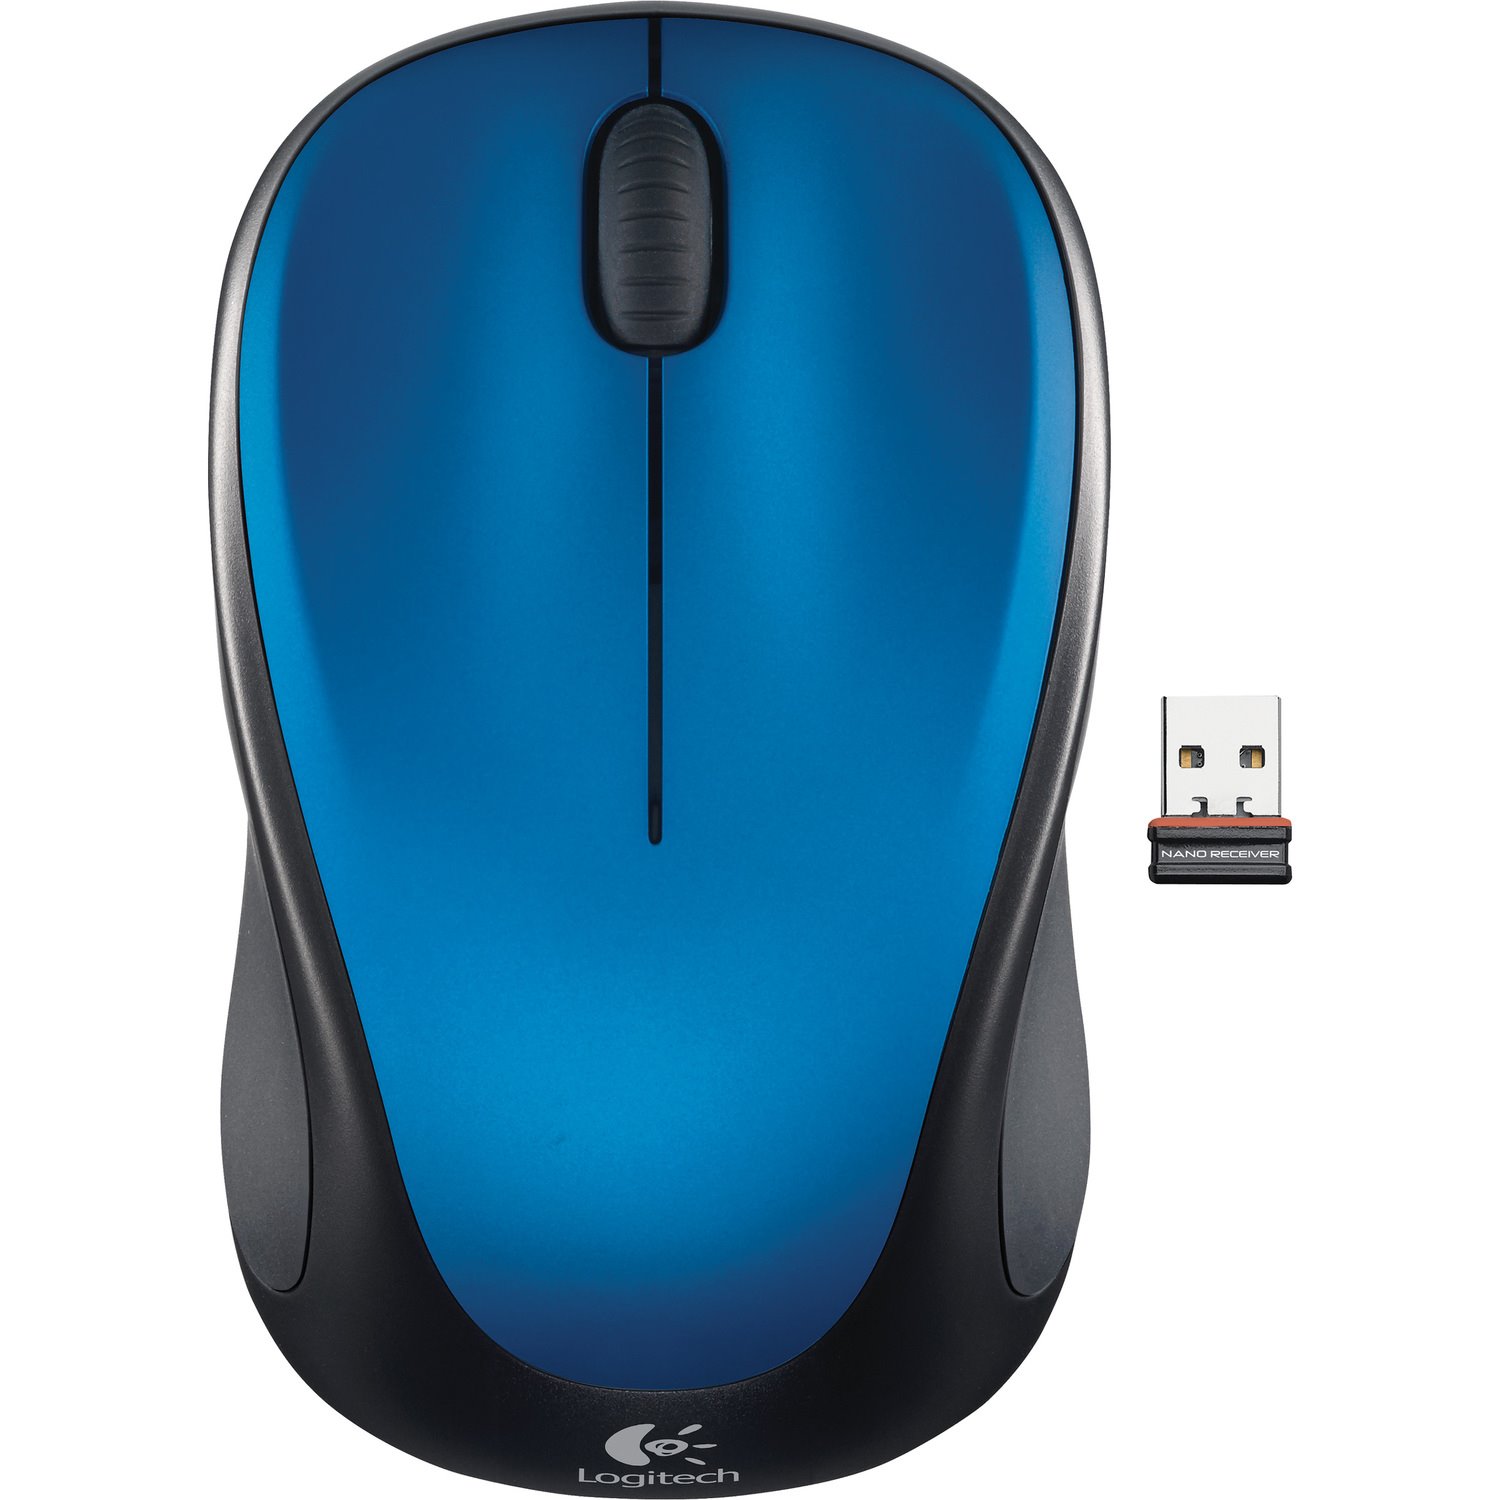 Logitech M235 Mouse - Radio Frequency - USB - Optical - Blue